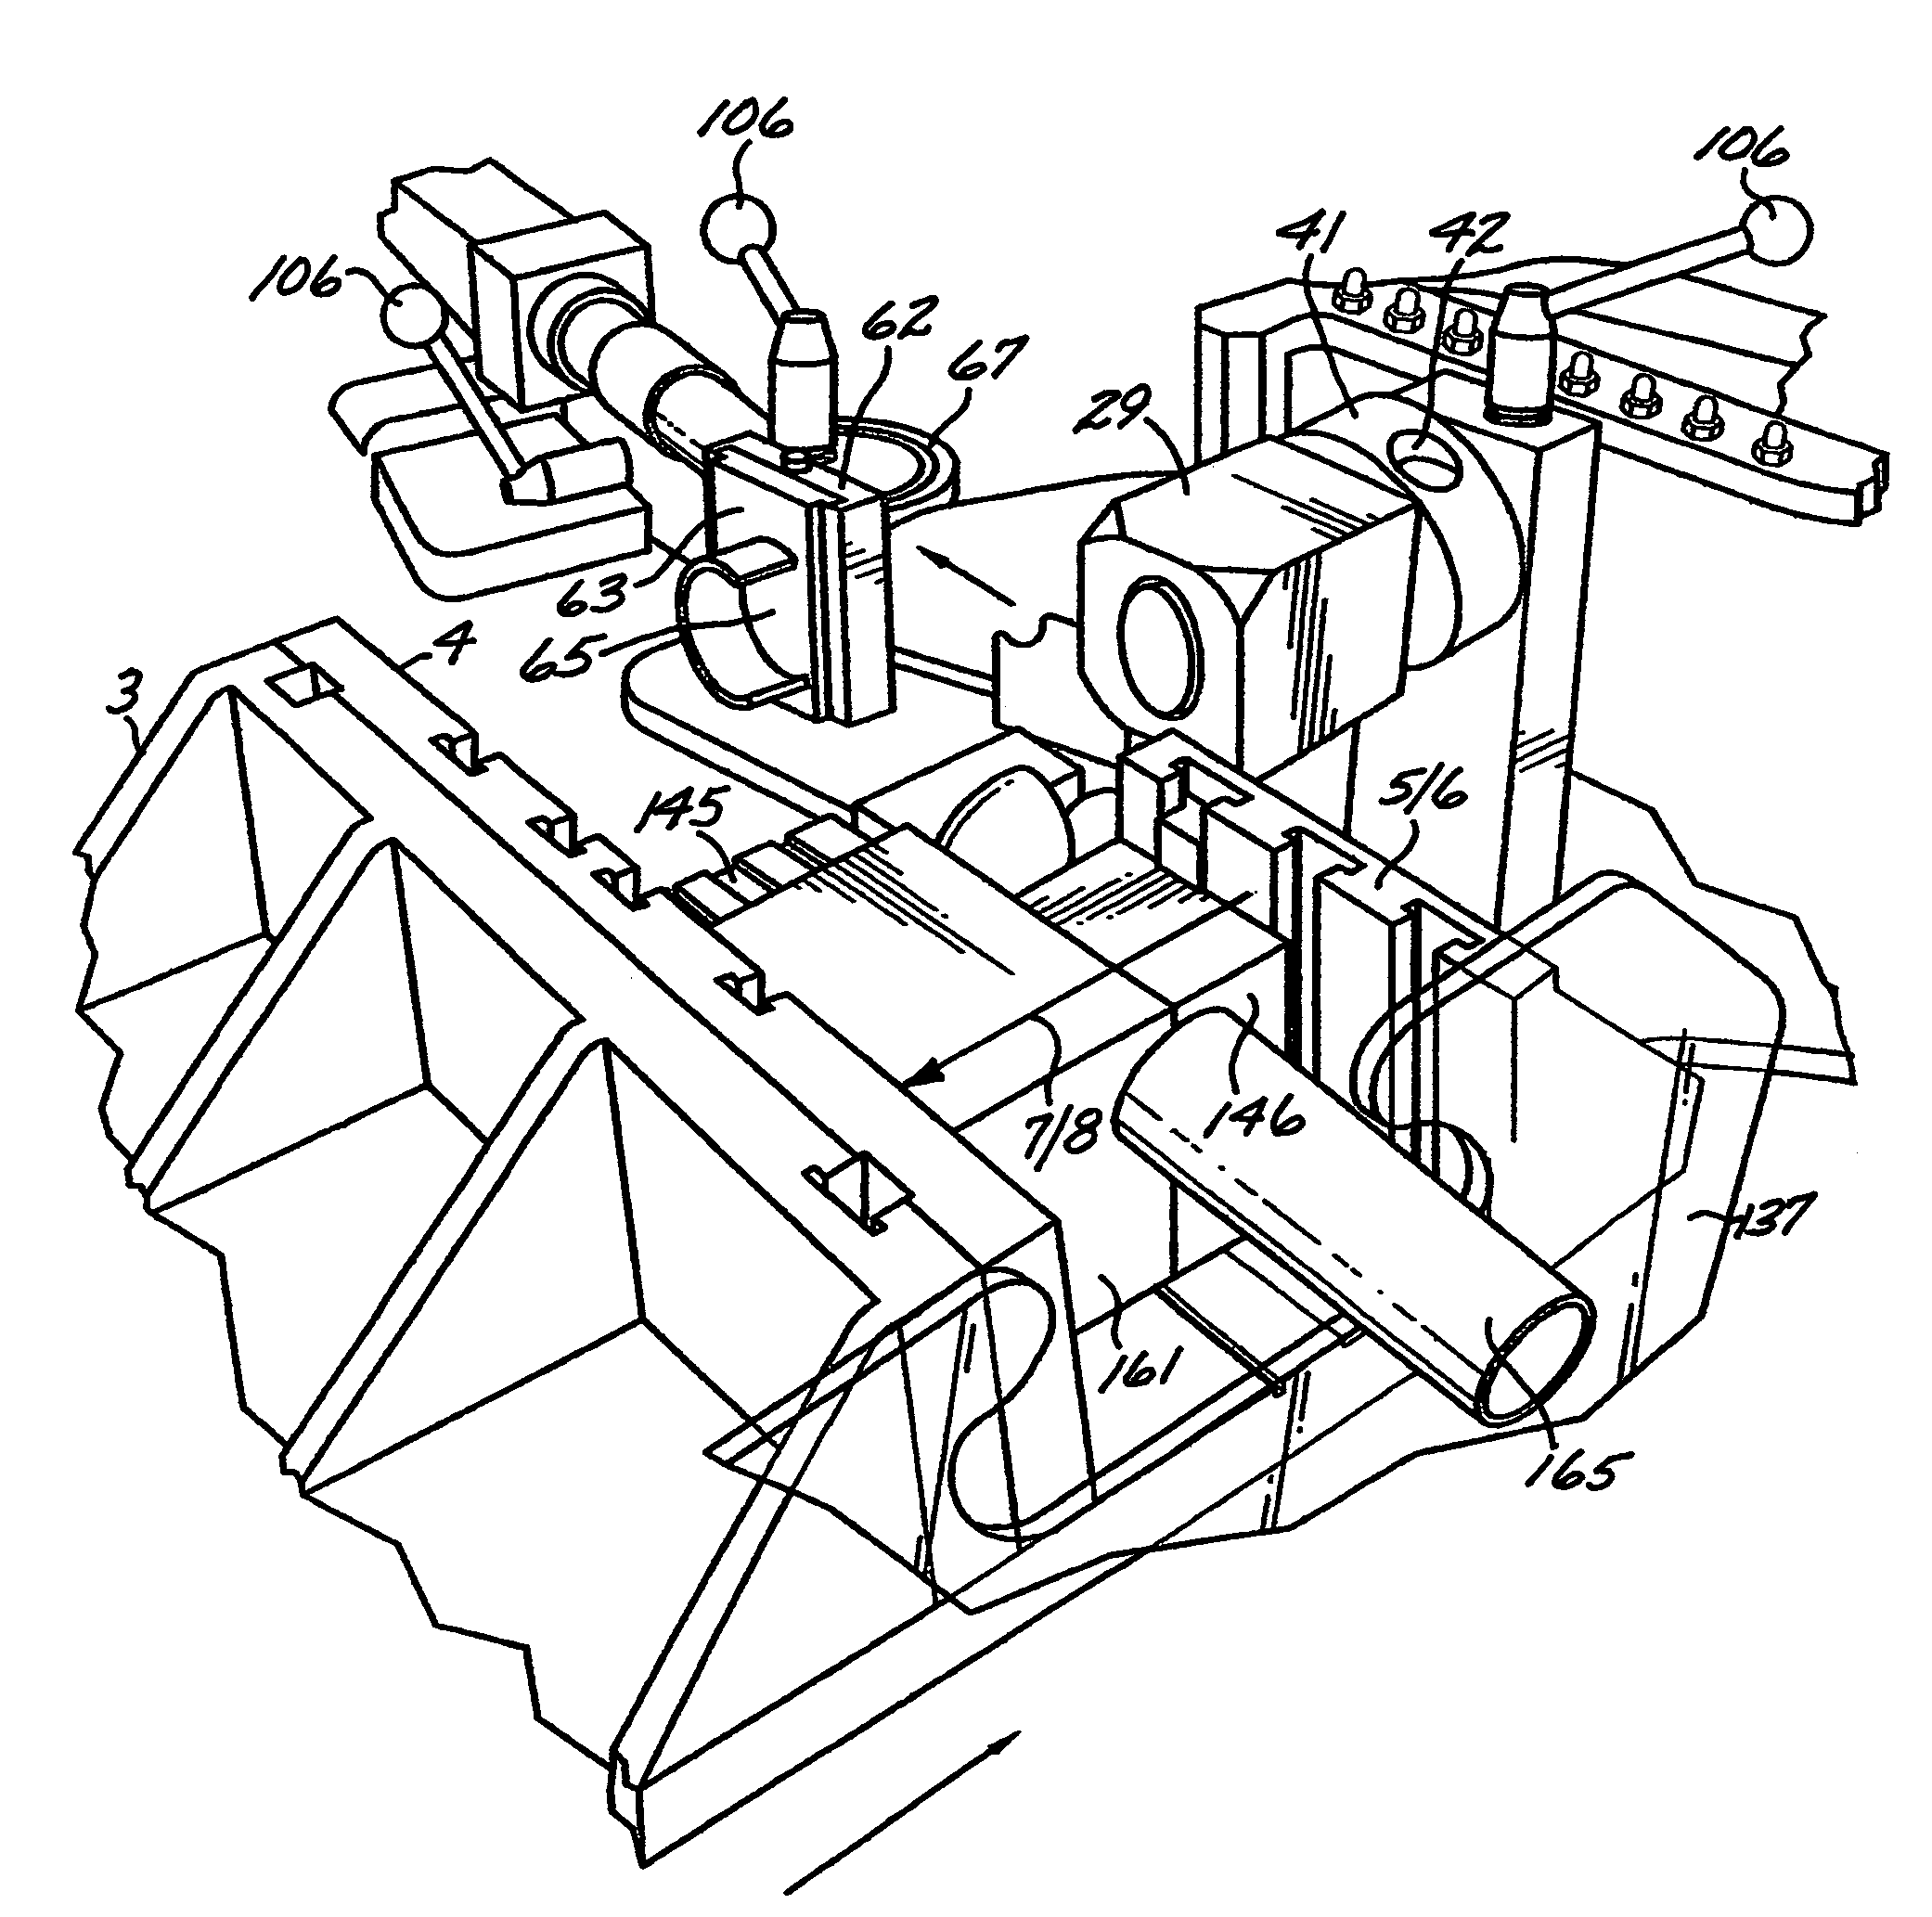 Tube end forming and coping method and apparatus